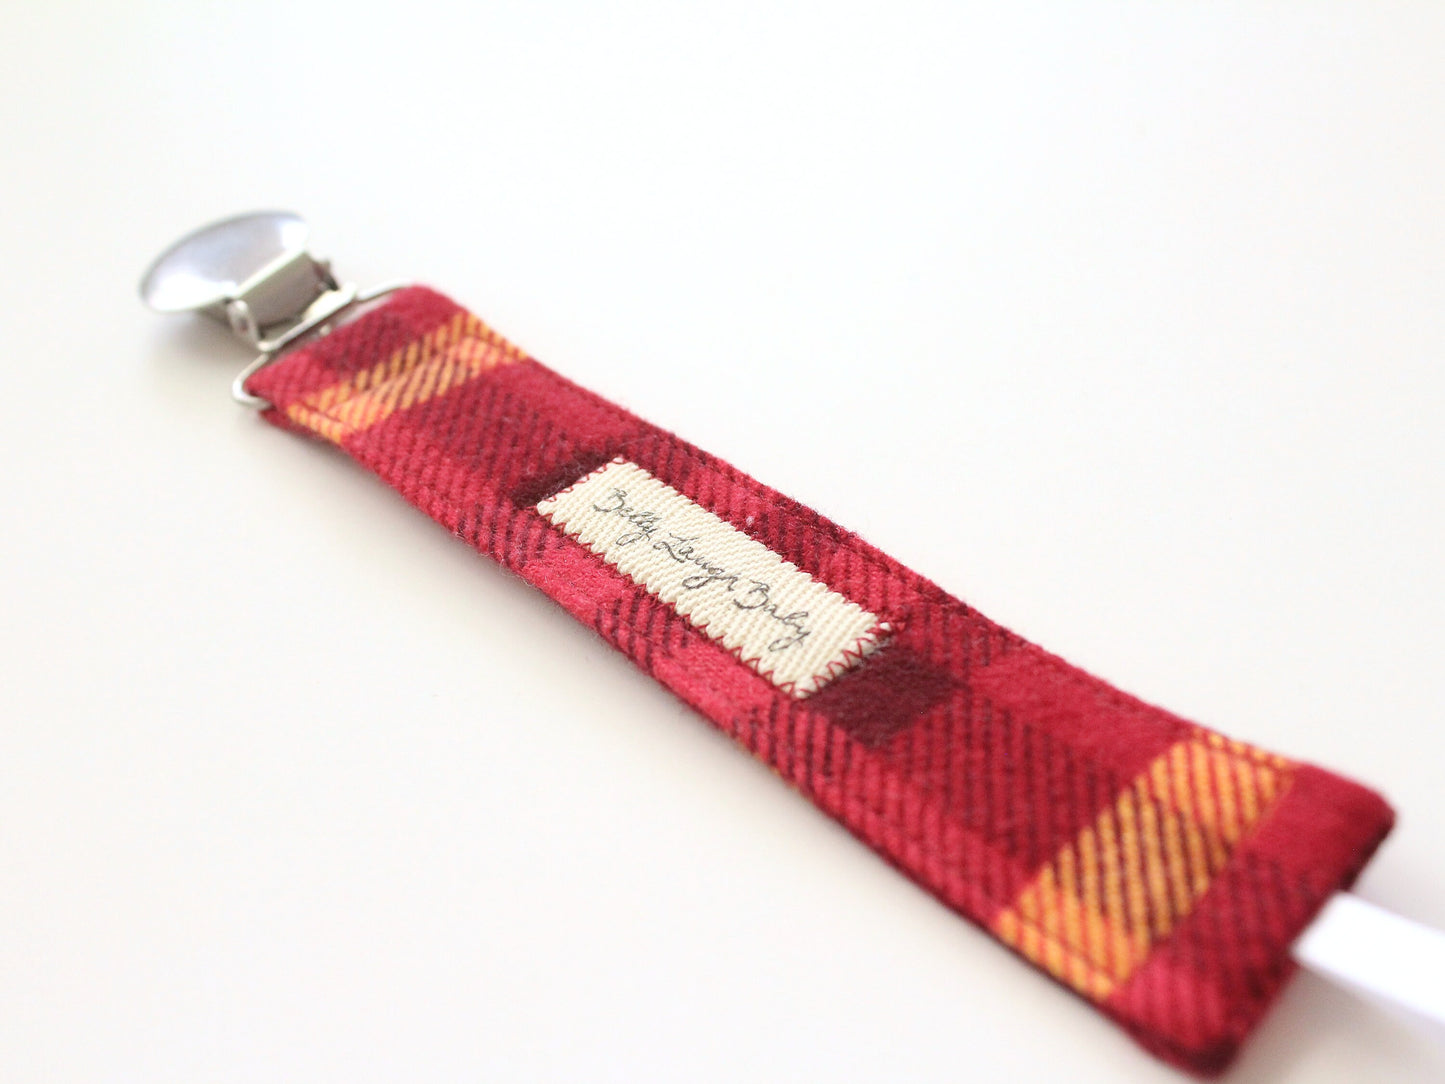 Red and Orange Plaid Fabric Pacifier Clip | Gender Neutral Baby Gift | Soother Leash Binky Holder | CPSC Compliant